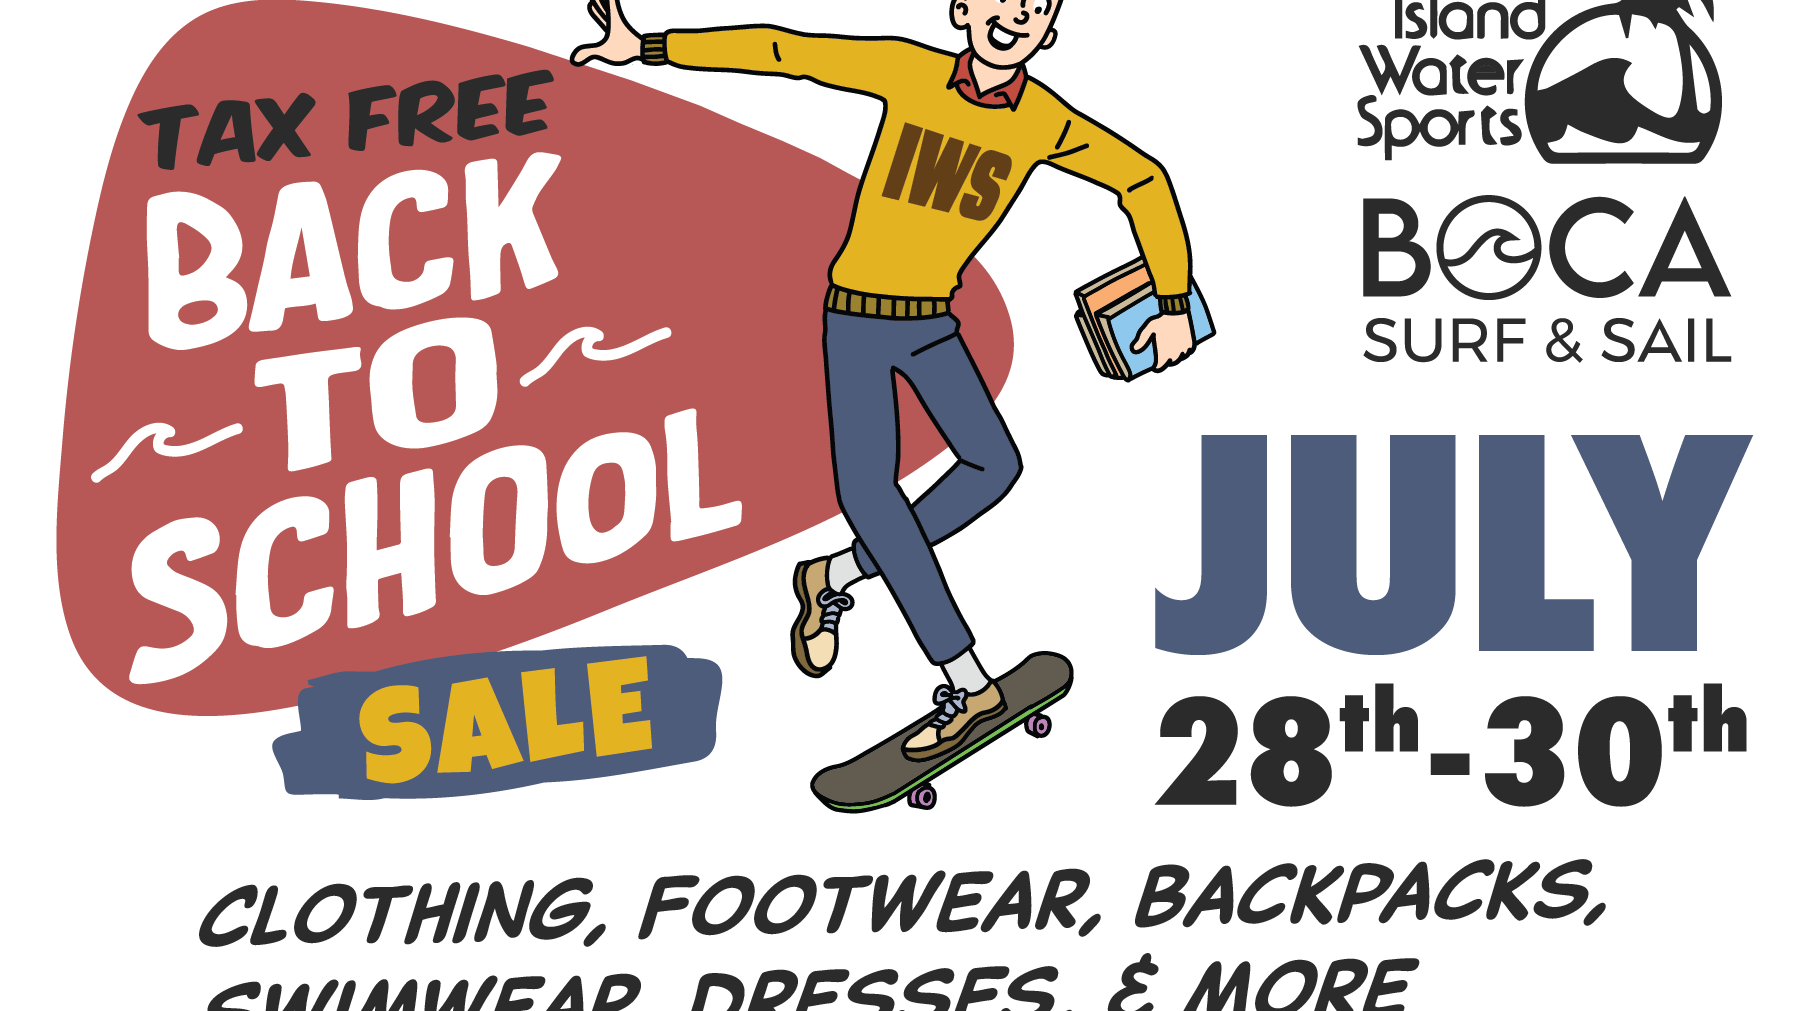 Great Deals Ahead: Shop Our Back-to-School Sale and Save More with Florida's Tax-Free Weekend